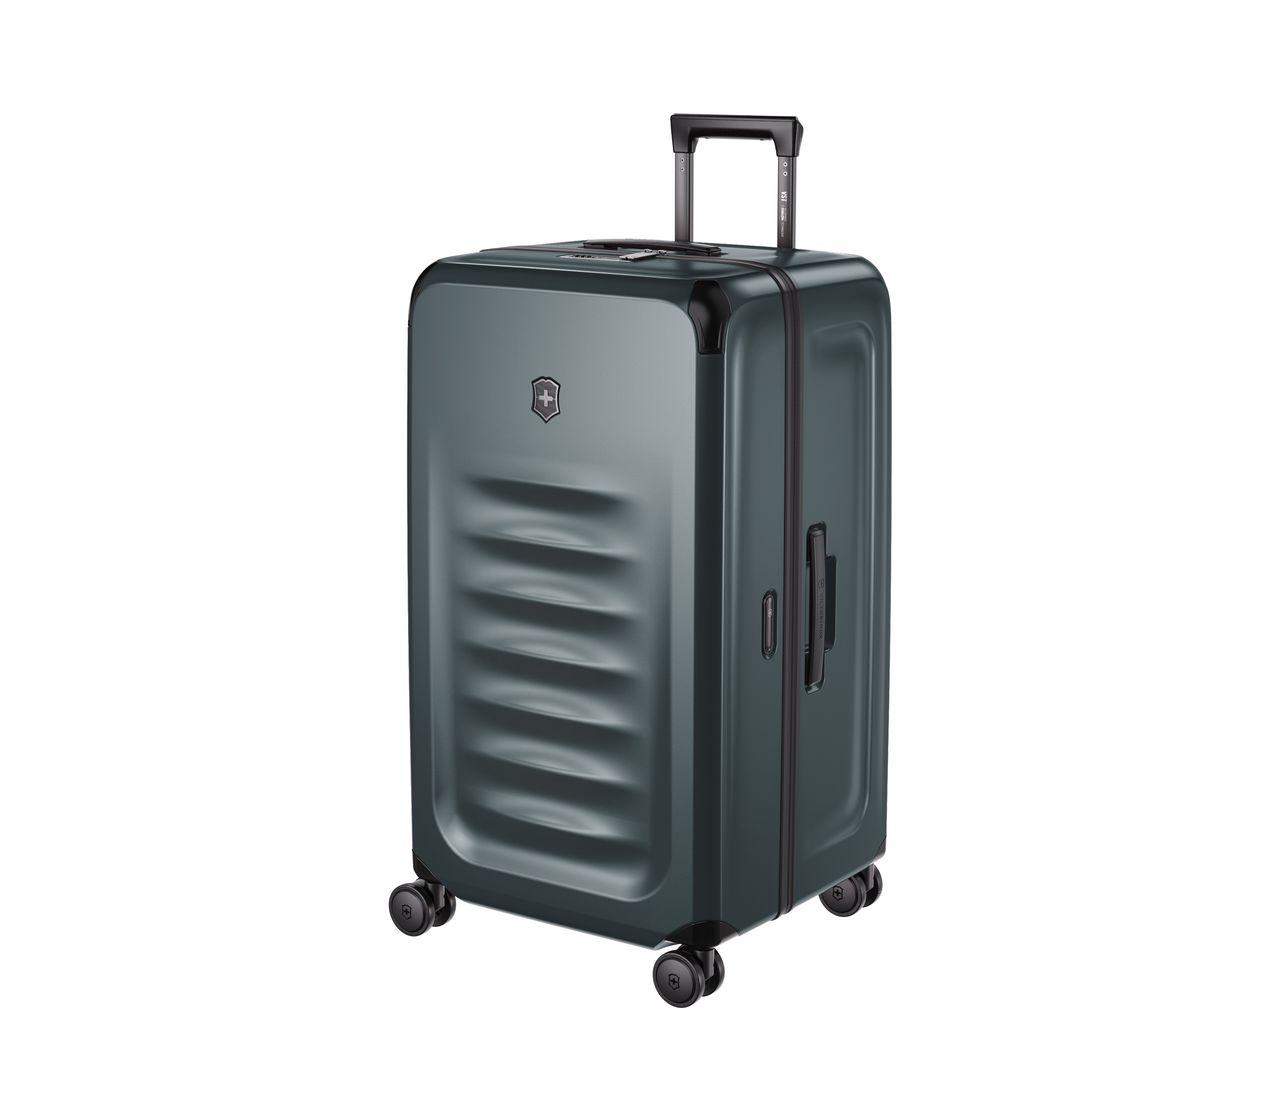 Spectra 3.0 Trunk Large Case-653159